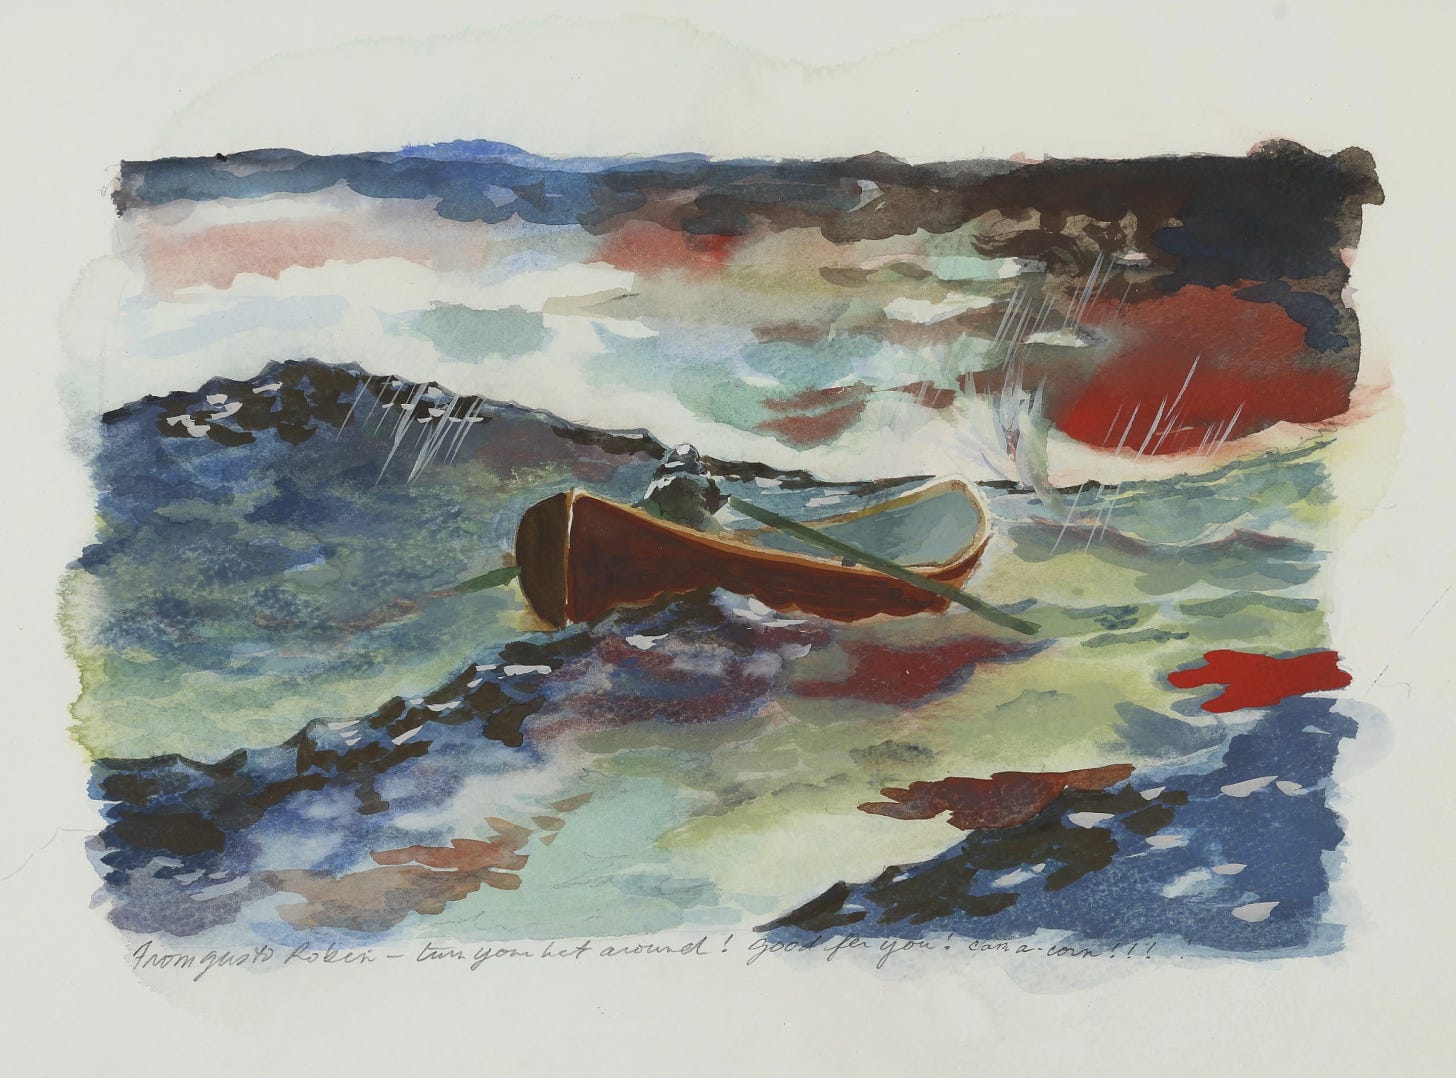 watercolor painting of a person rowing a dinghy in rough seas